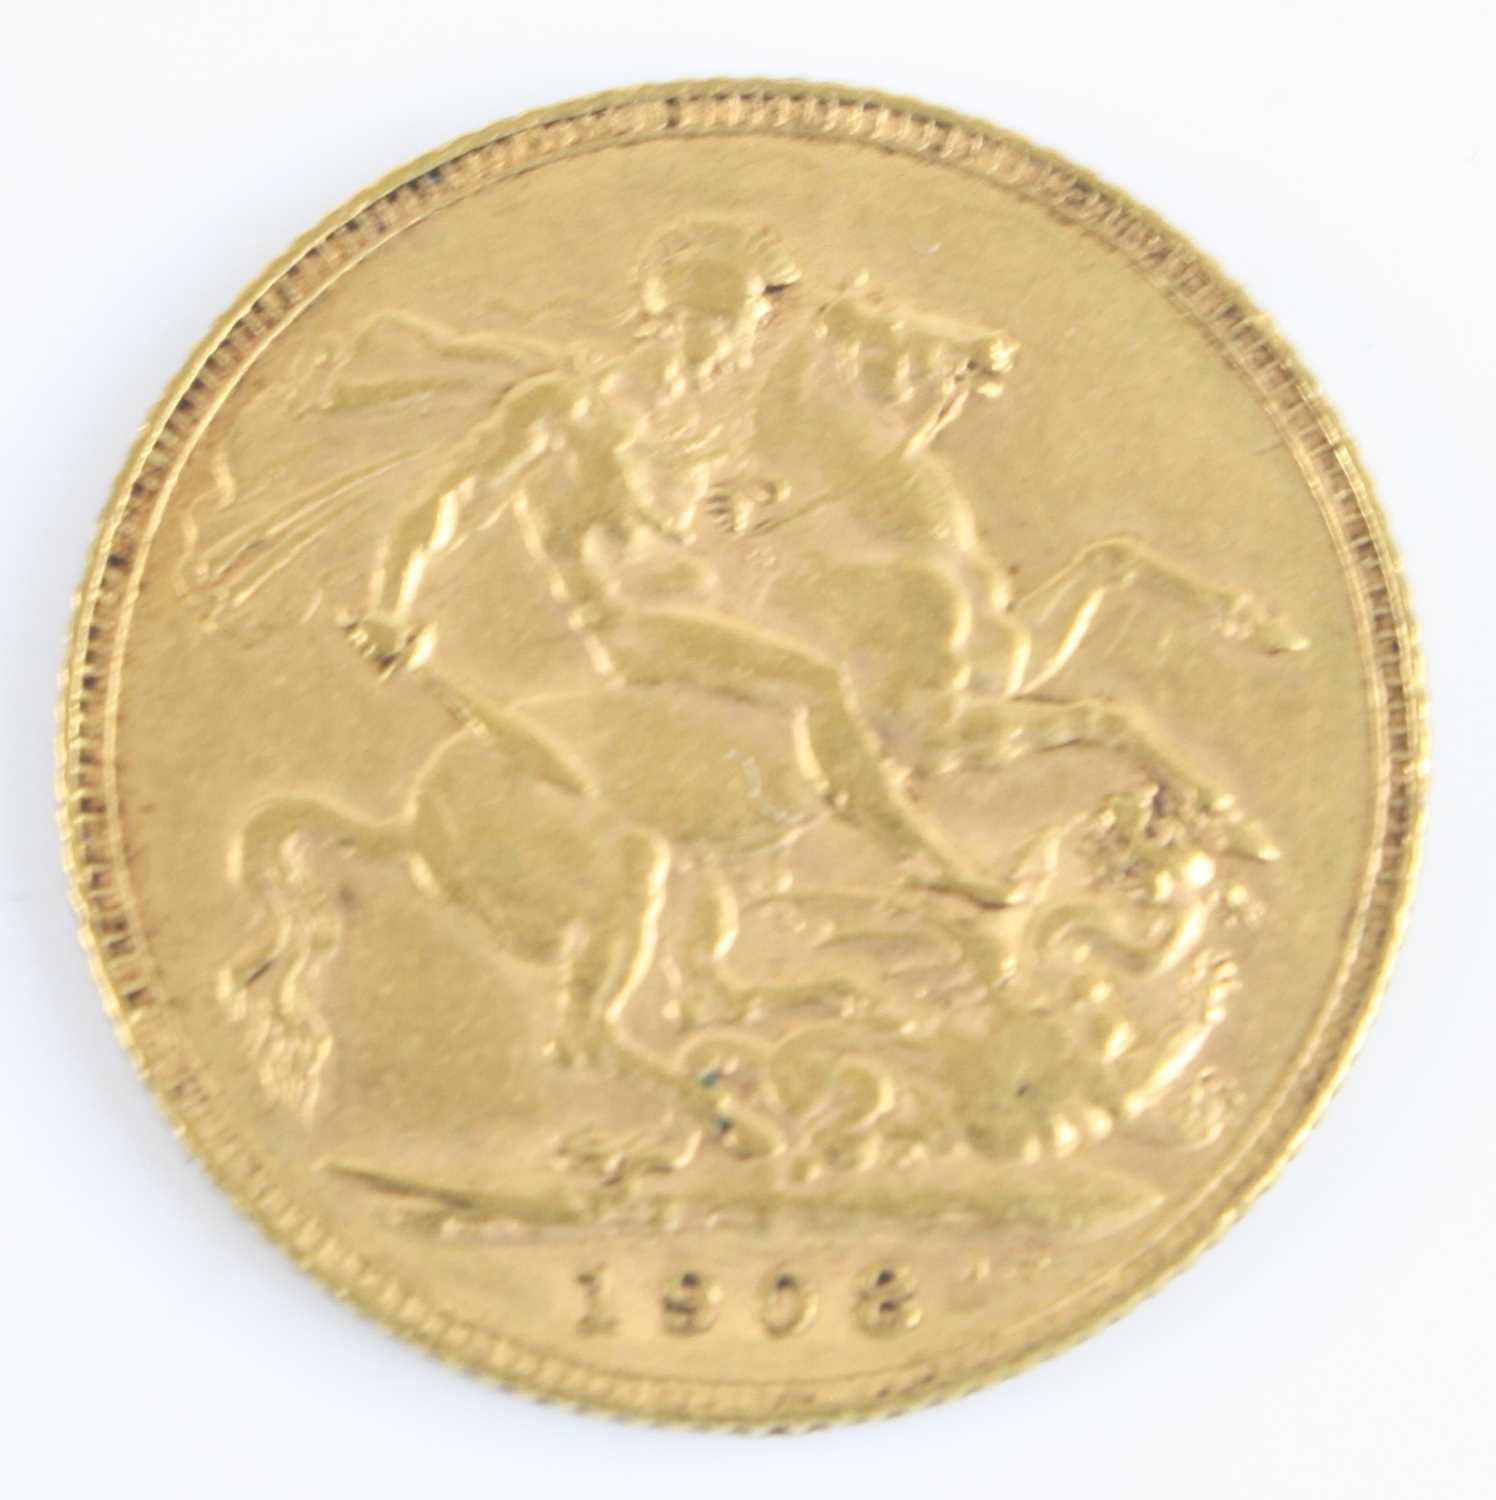 Great Britain, 1908 gold full sovereign, George V, rev: St George and Dragon above date. (1) - Image 2 of 2